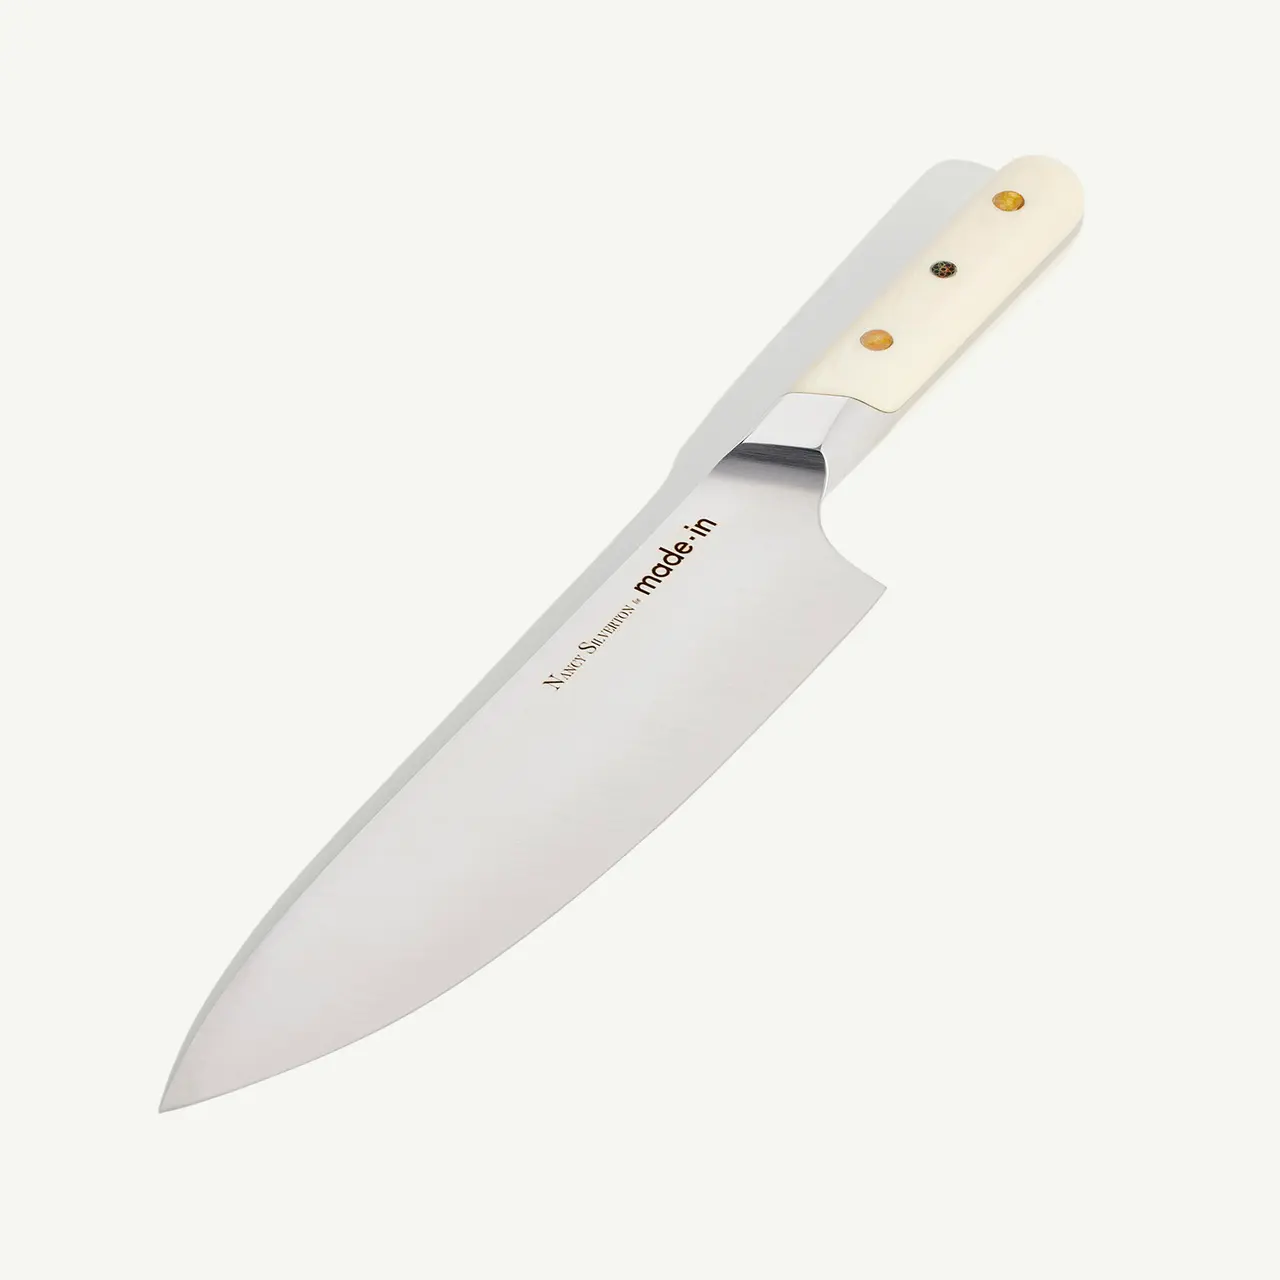 A chef's knife with a white handle and a stainless steel blade against a plain background.